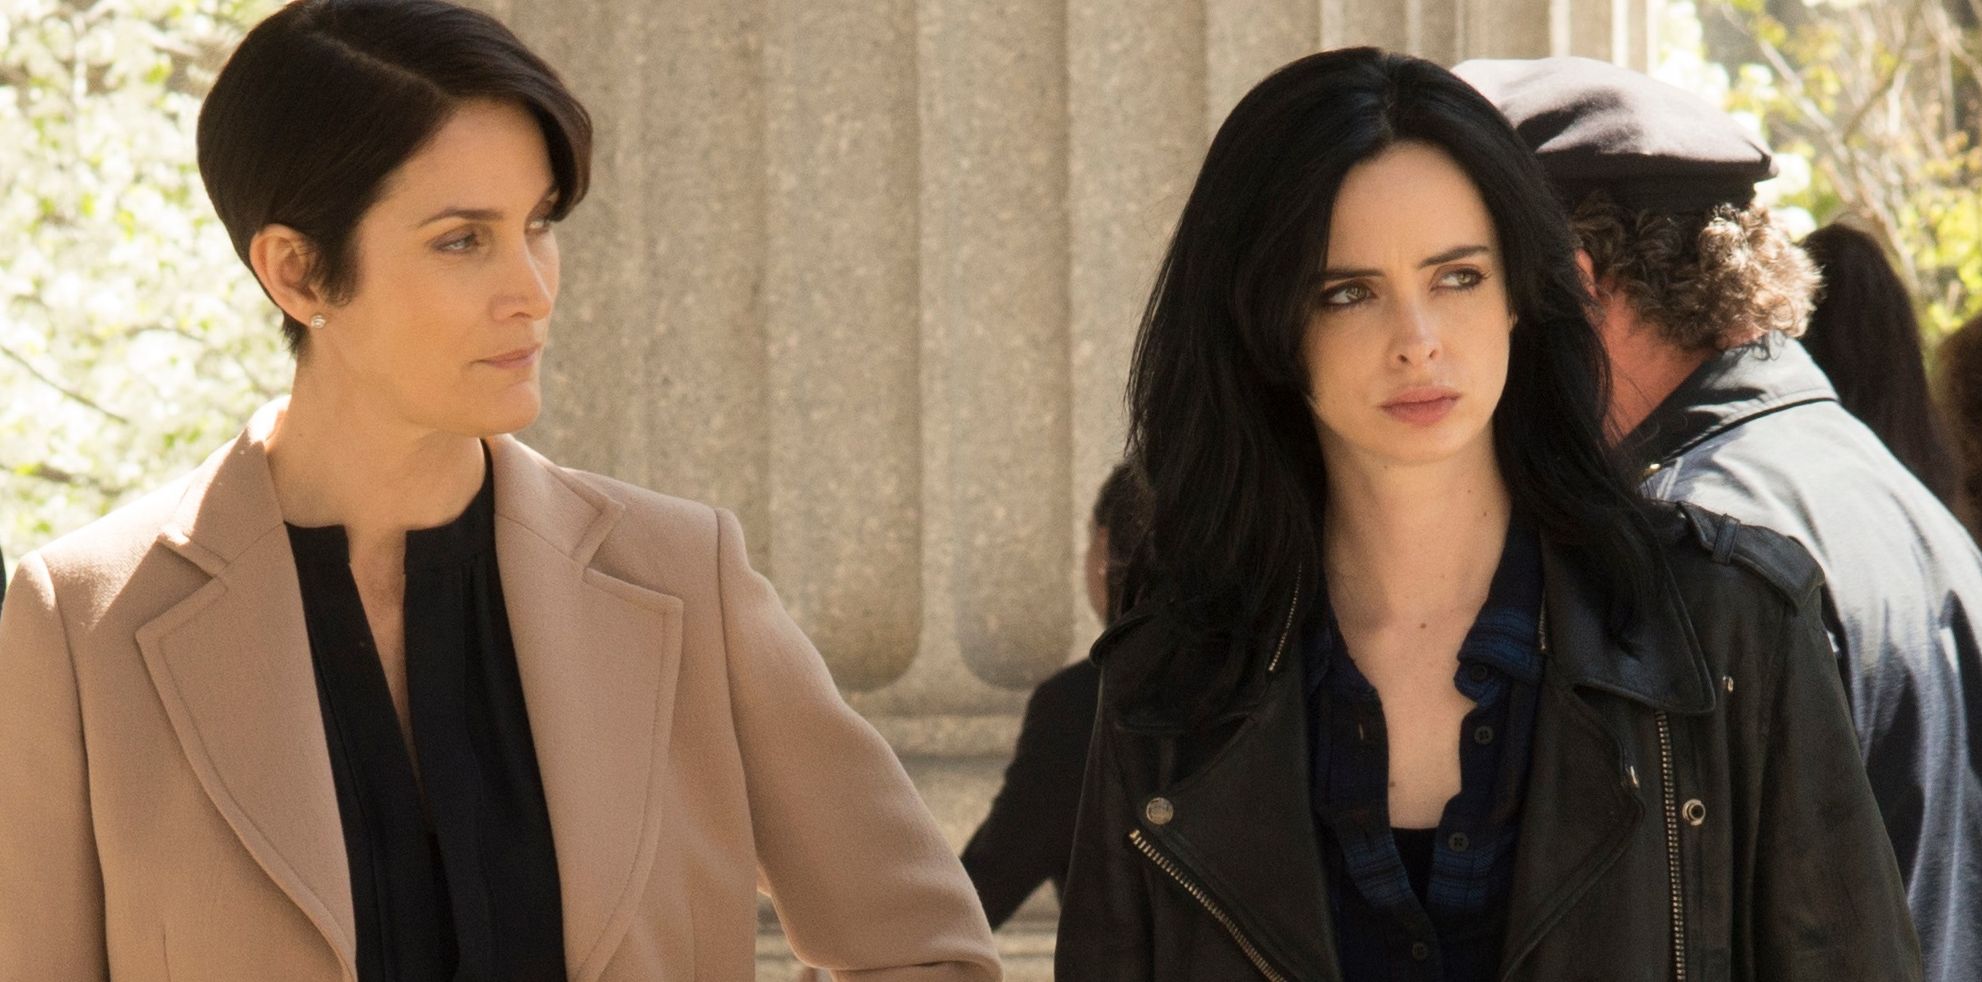 Carrie-Anne Moss joins Iron Fist